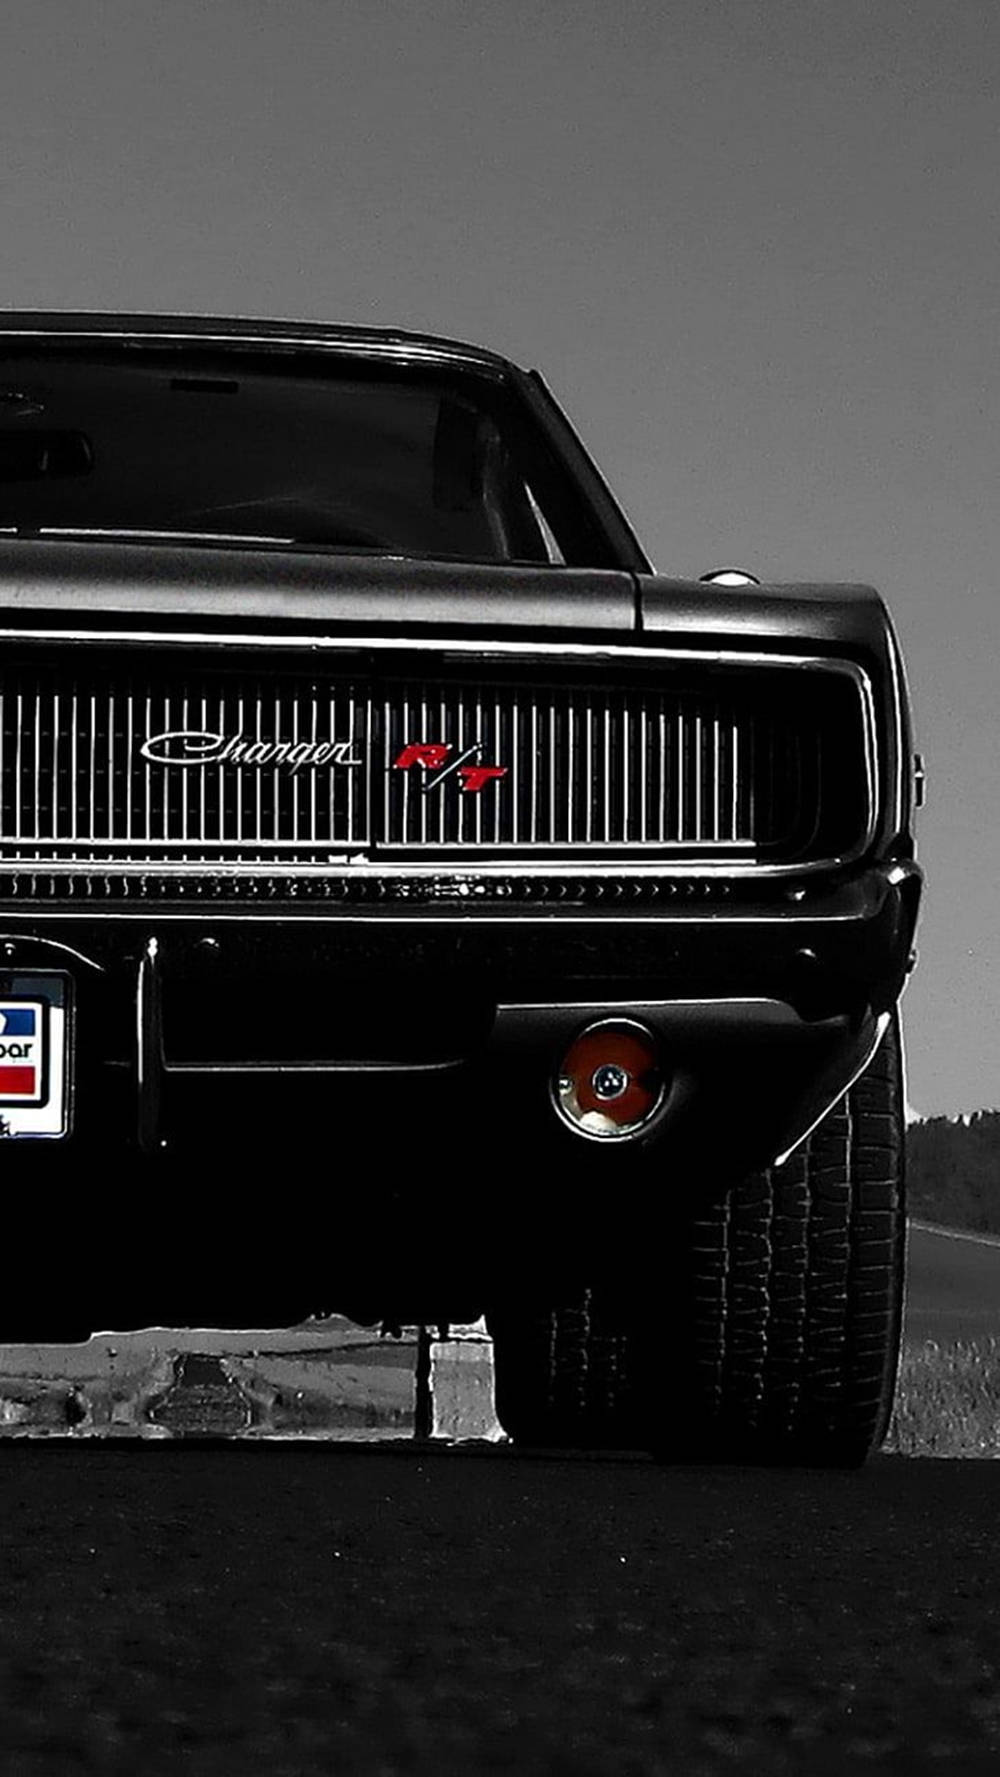 Black Dodge Charger Classic Car Phone Background